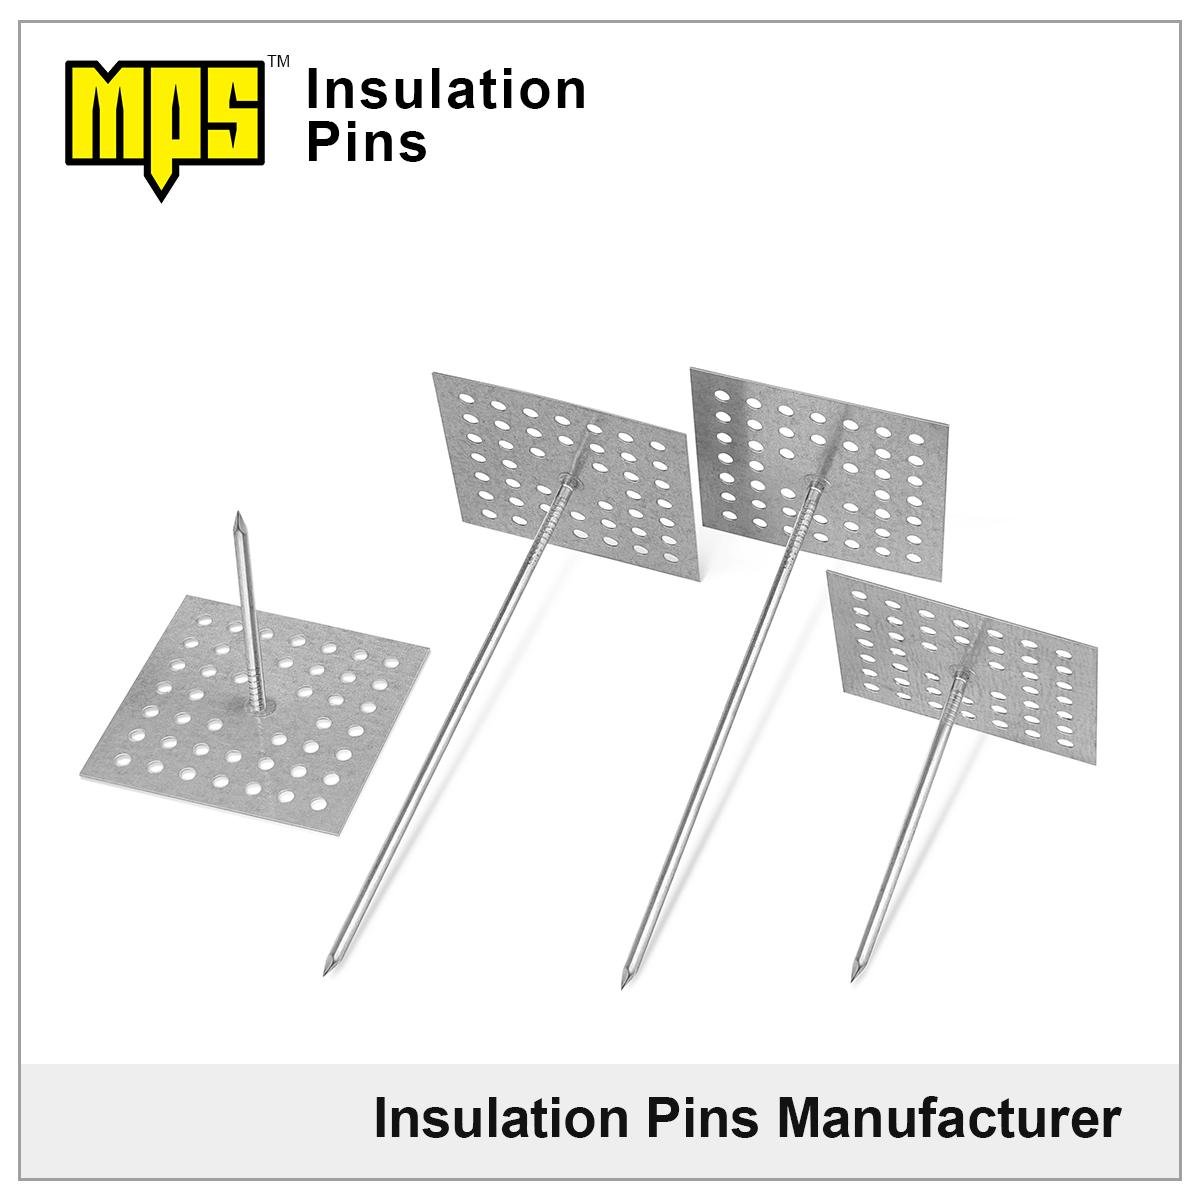 12Gauge 1-5/8" long 50*50mm perforated base insulation pins